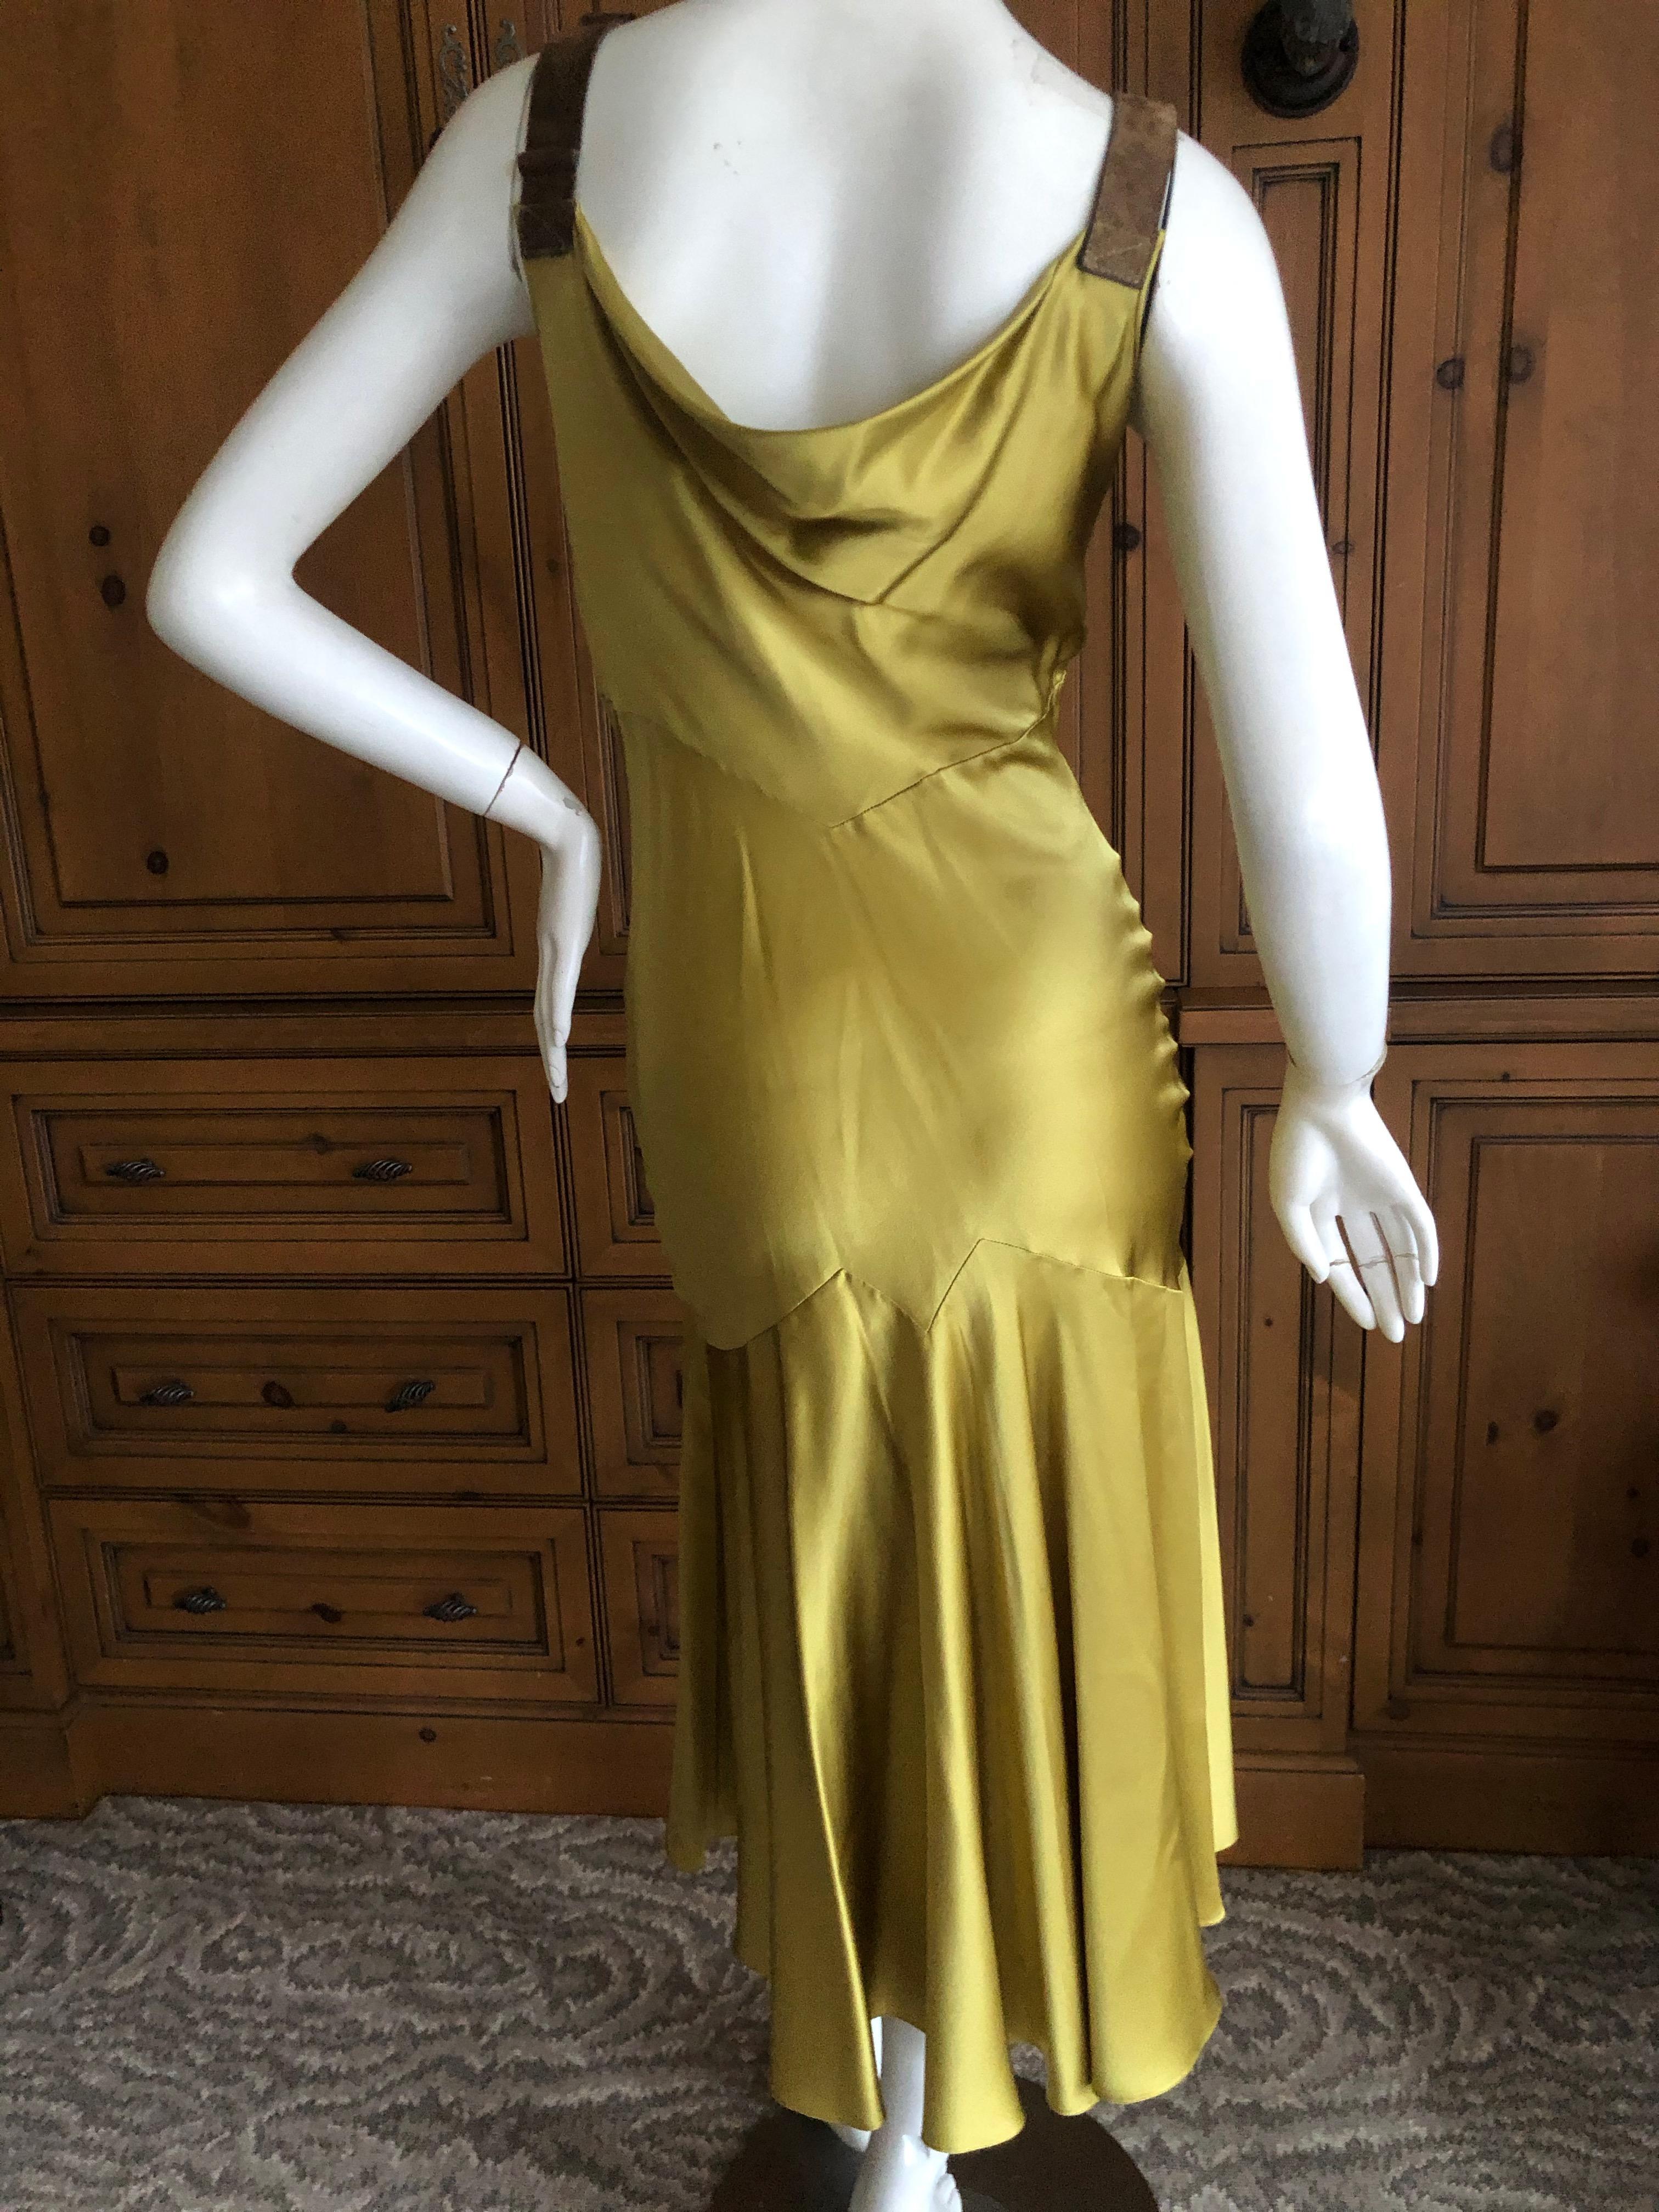 John Galliano Chartreuse Silk Charmeuse Cocktail Dress with Leather Straps For Sale 1